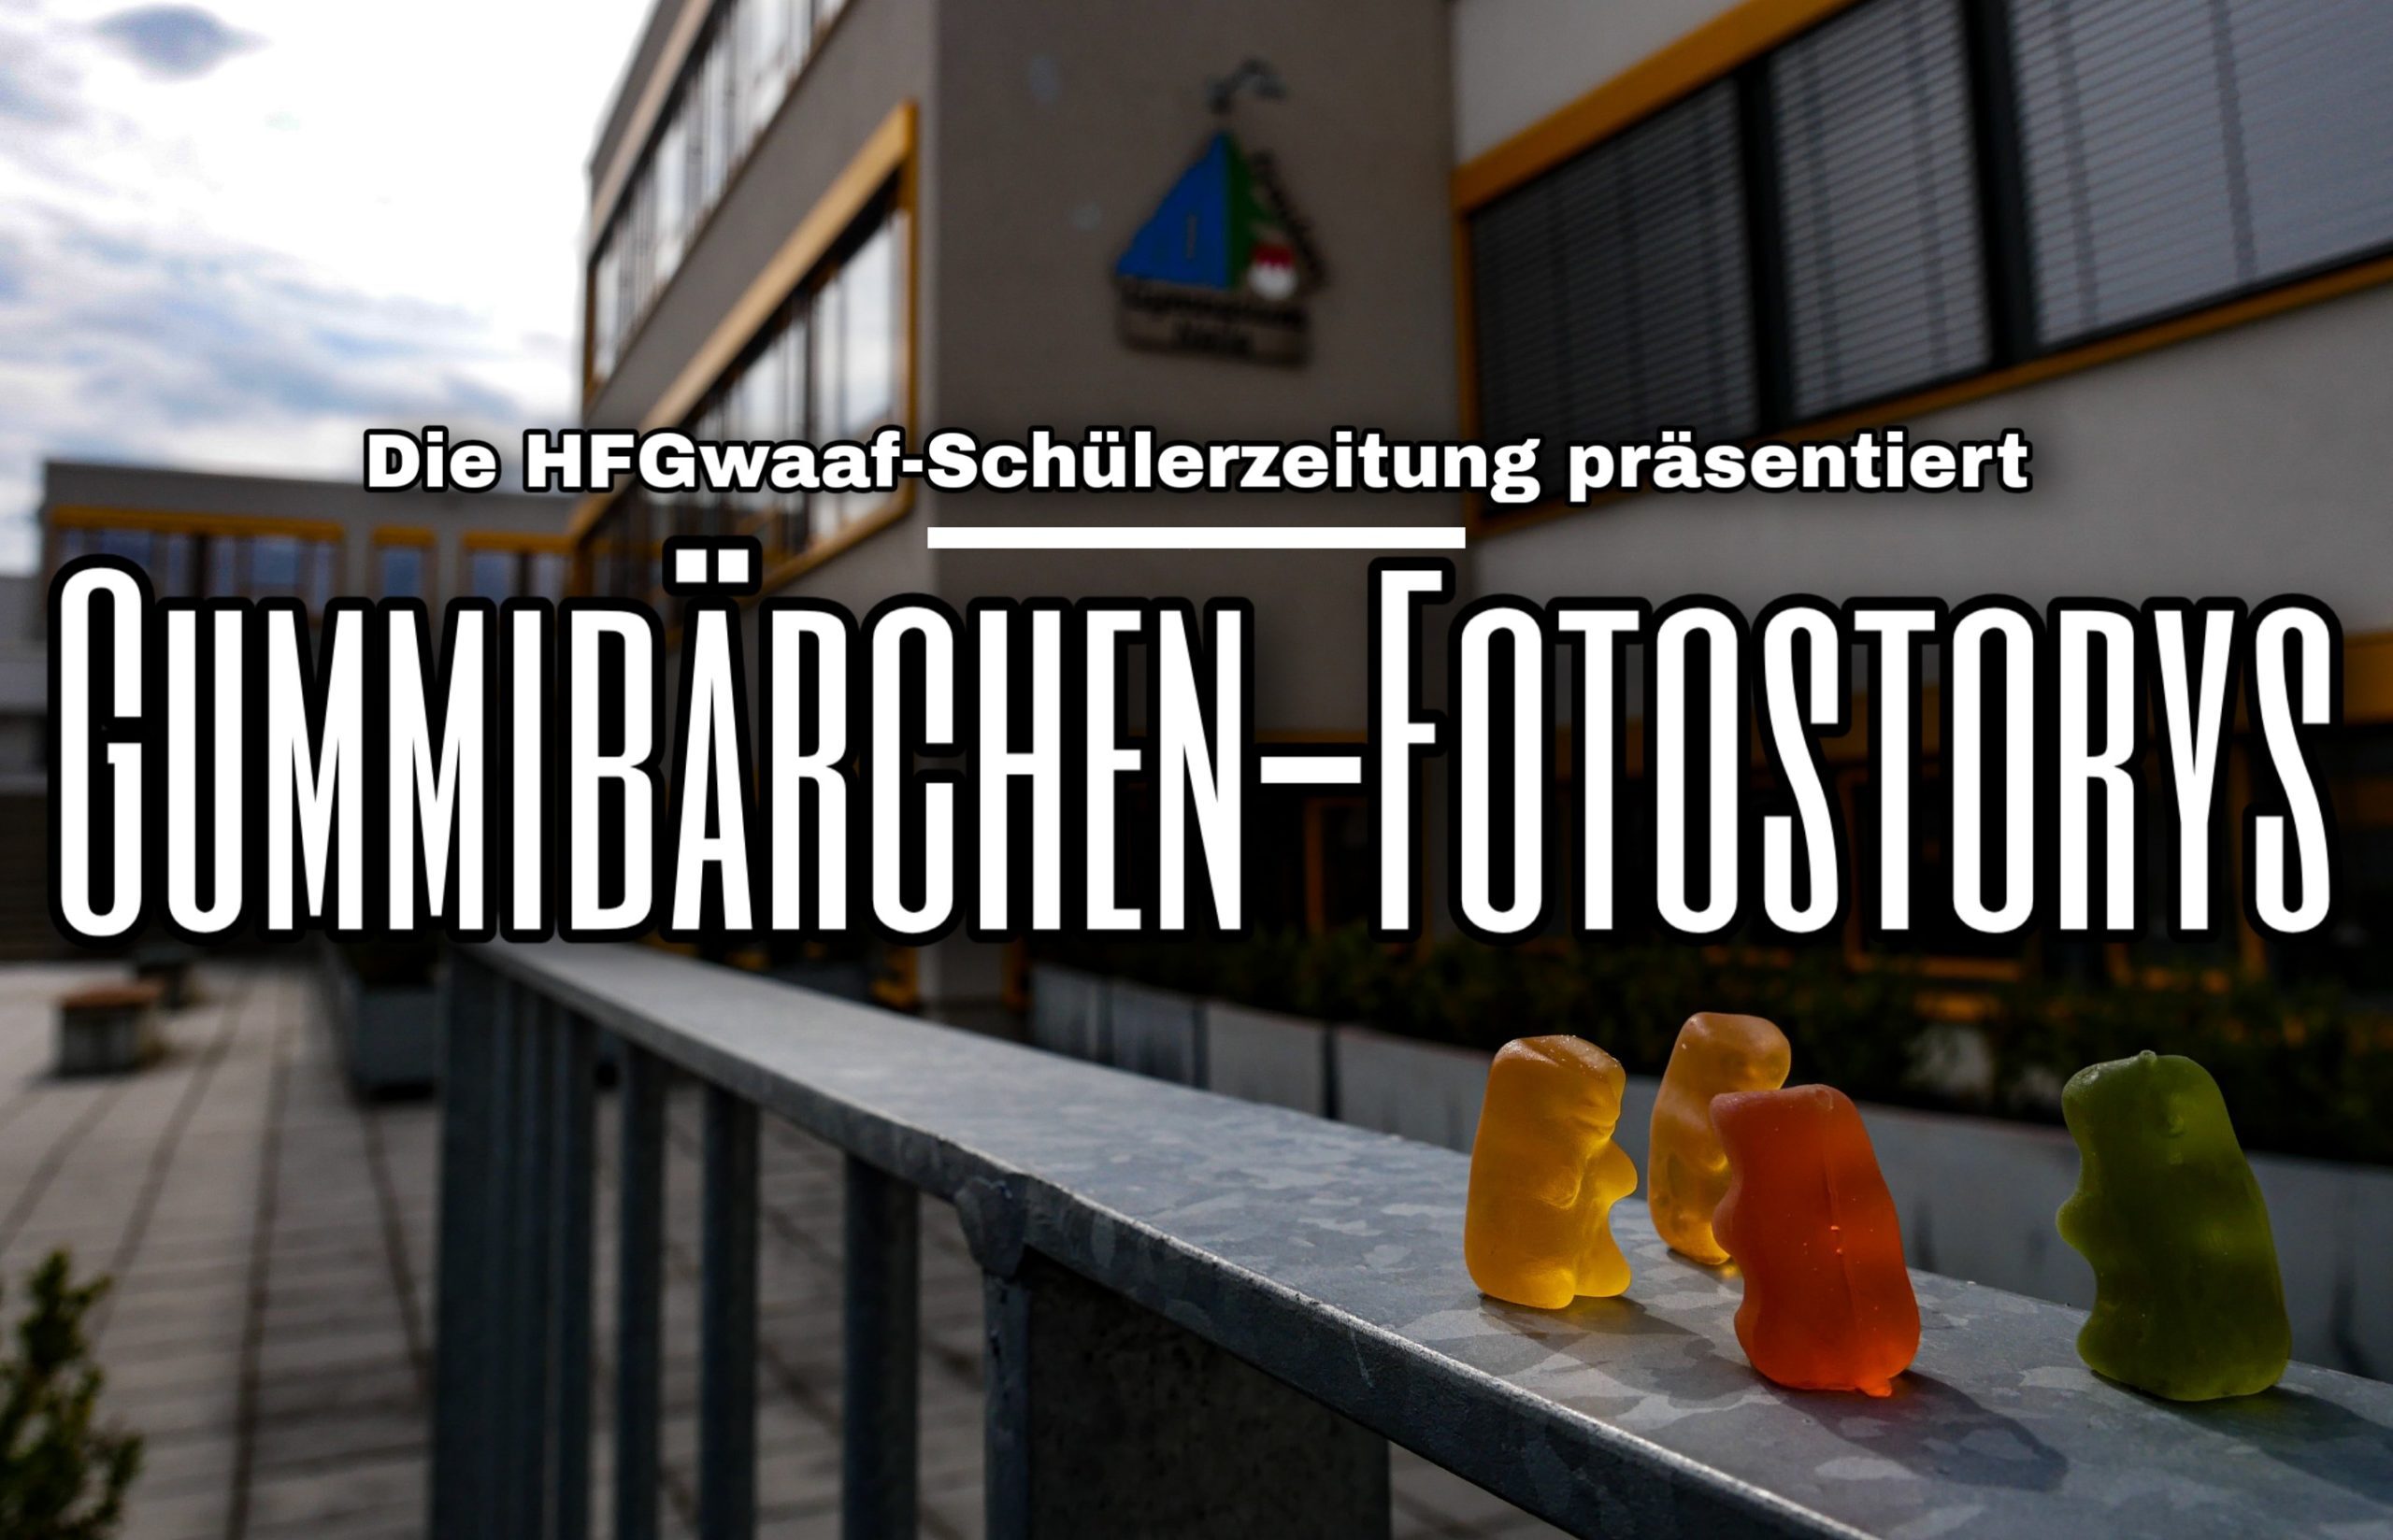 You are currently viewing Ab in den Herbst! – Die Gummibärchen-Fotostory